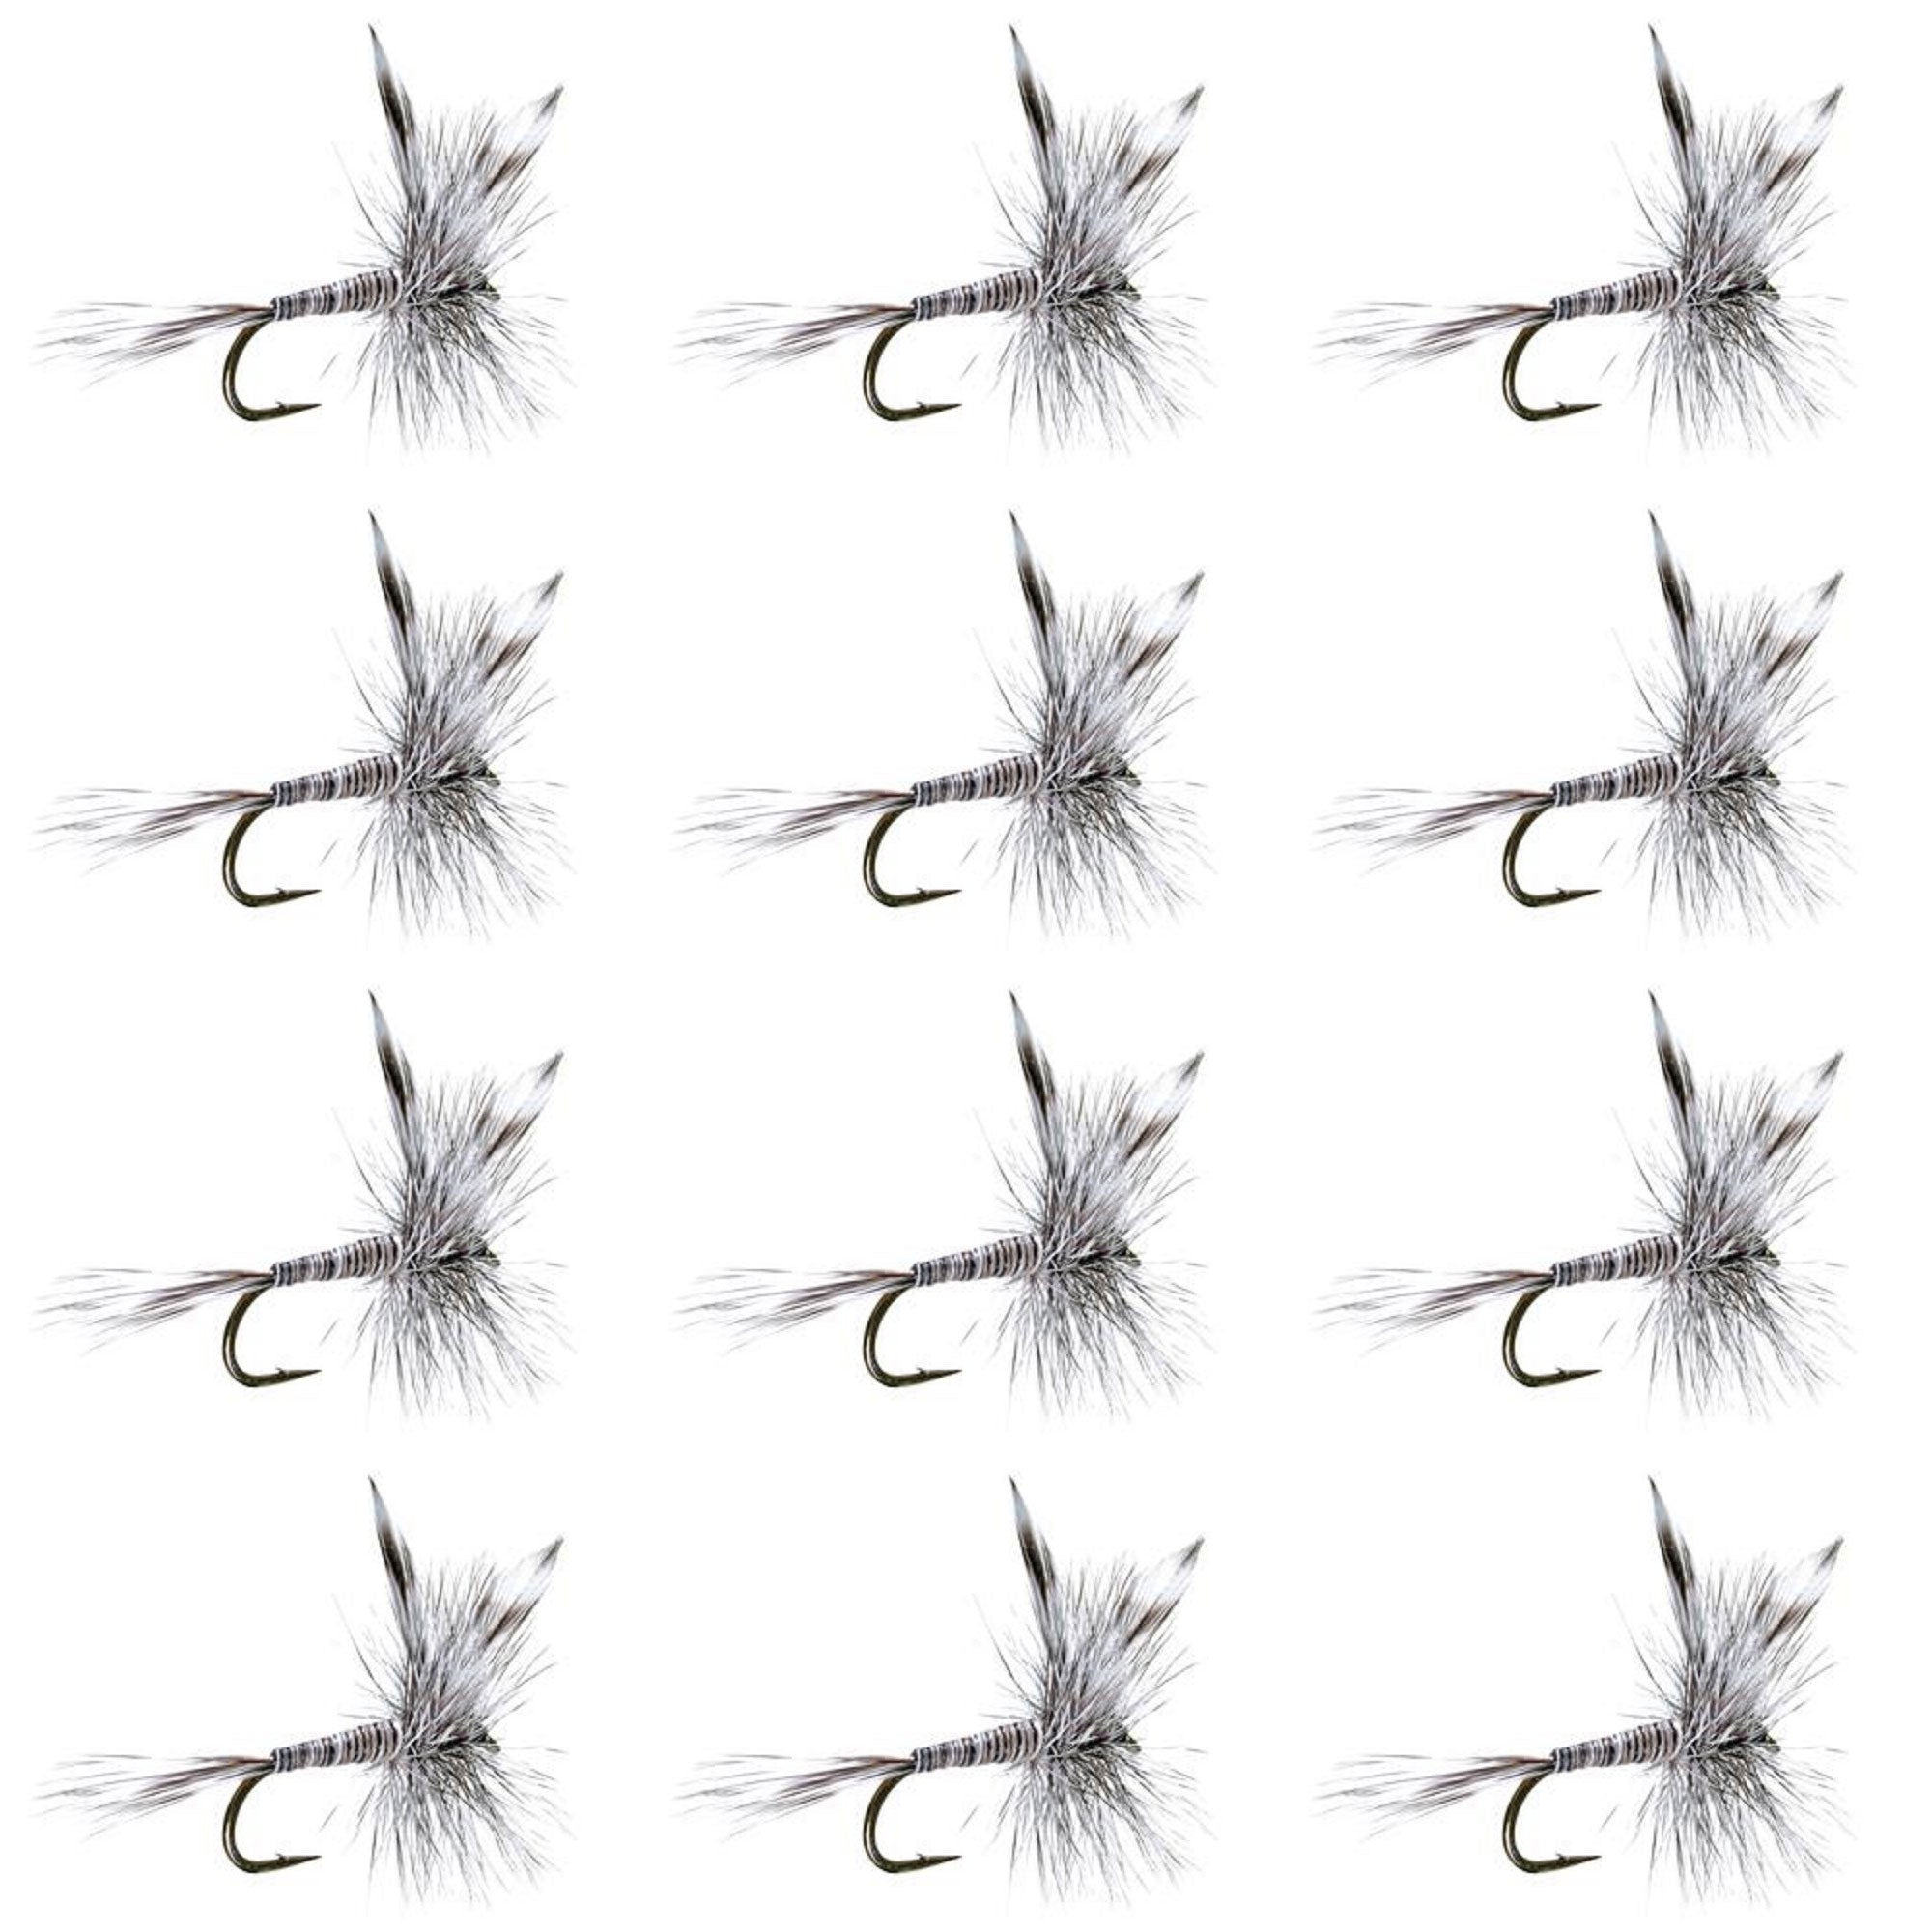 Mosquito Classic Trout Dry Fly Fishing Flies - 1 Dozen Size 12